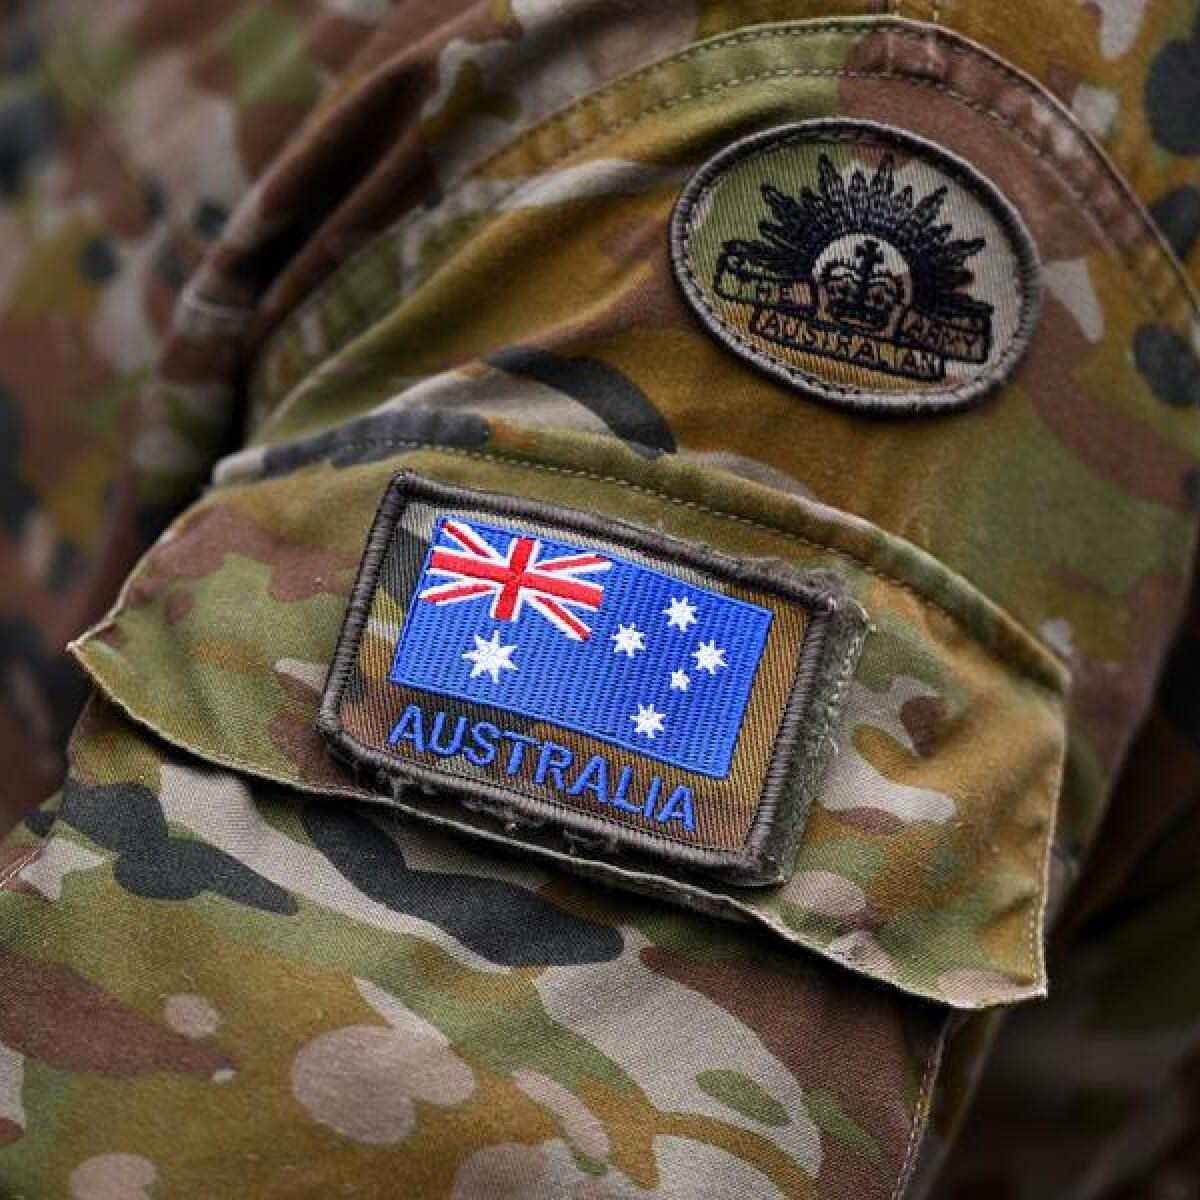 A file photo showing the ADF uniform 